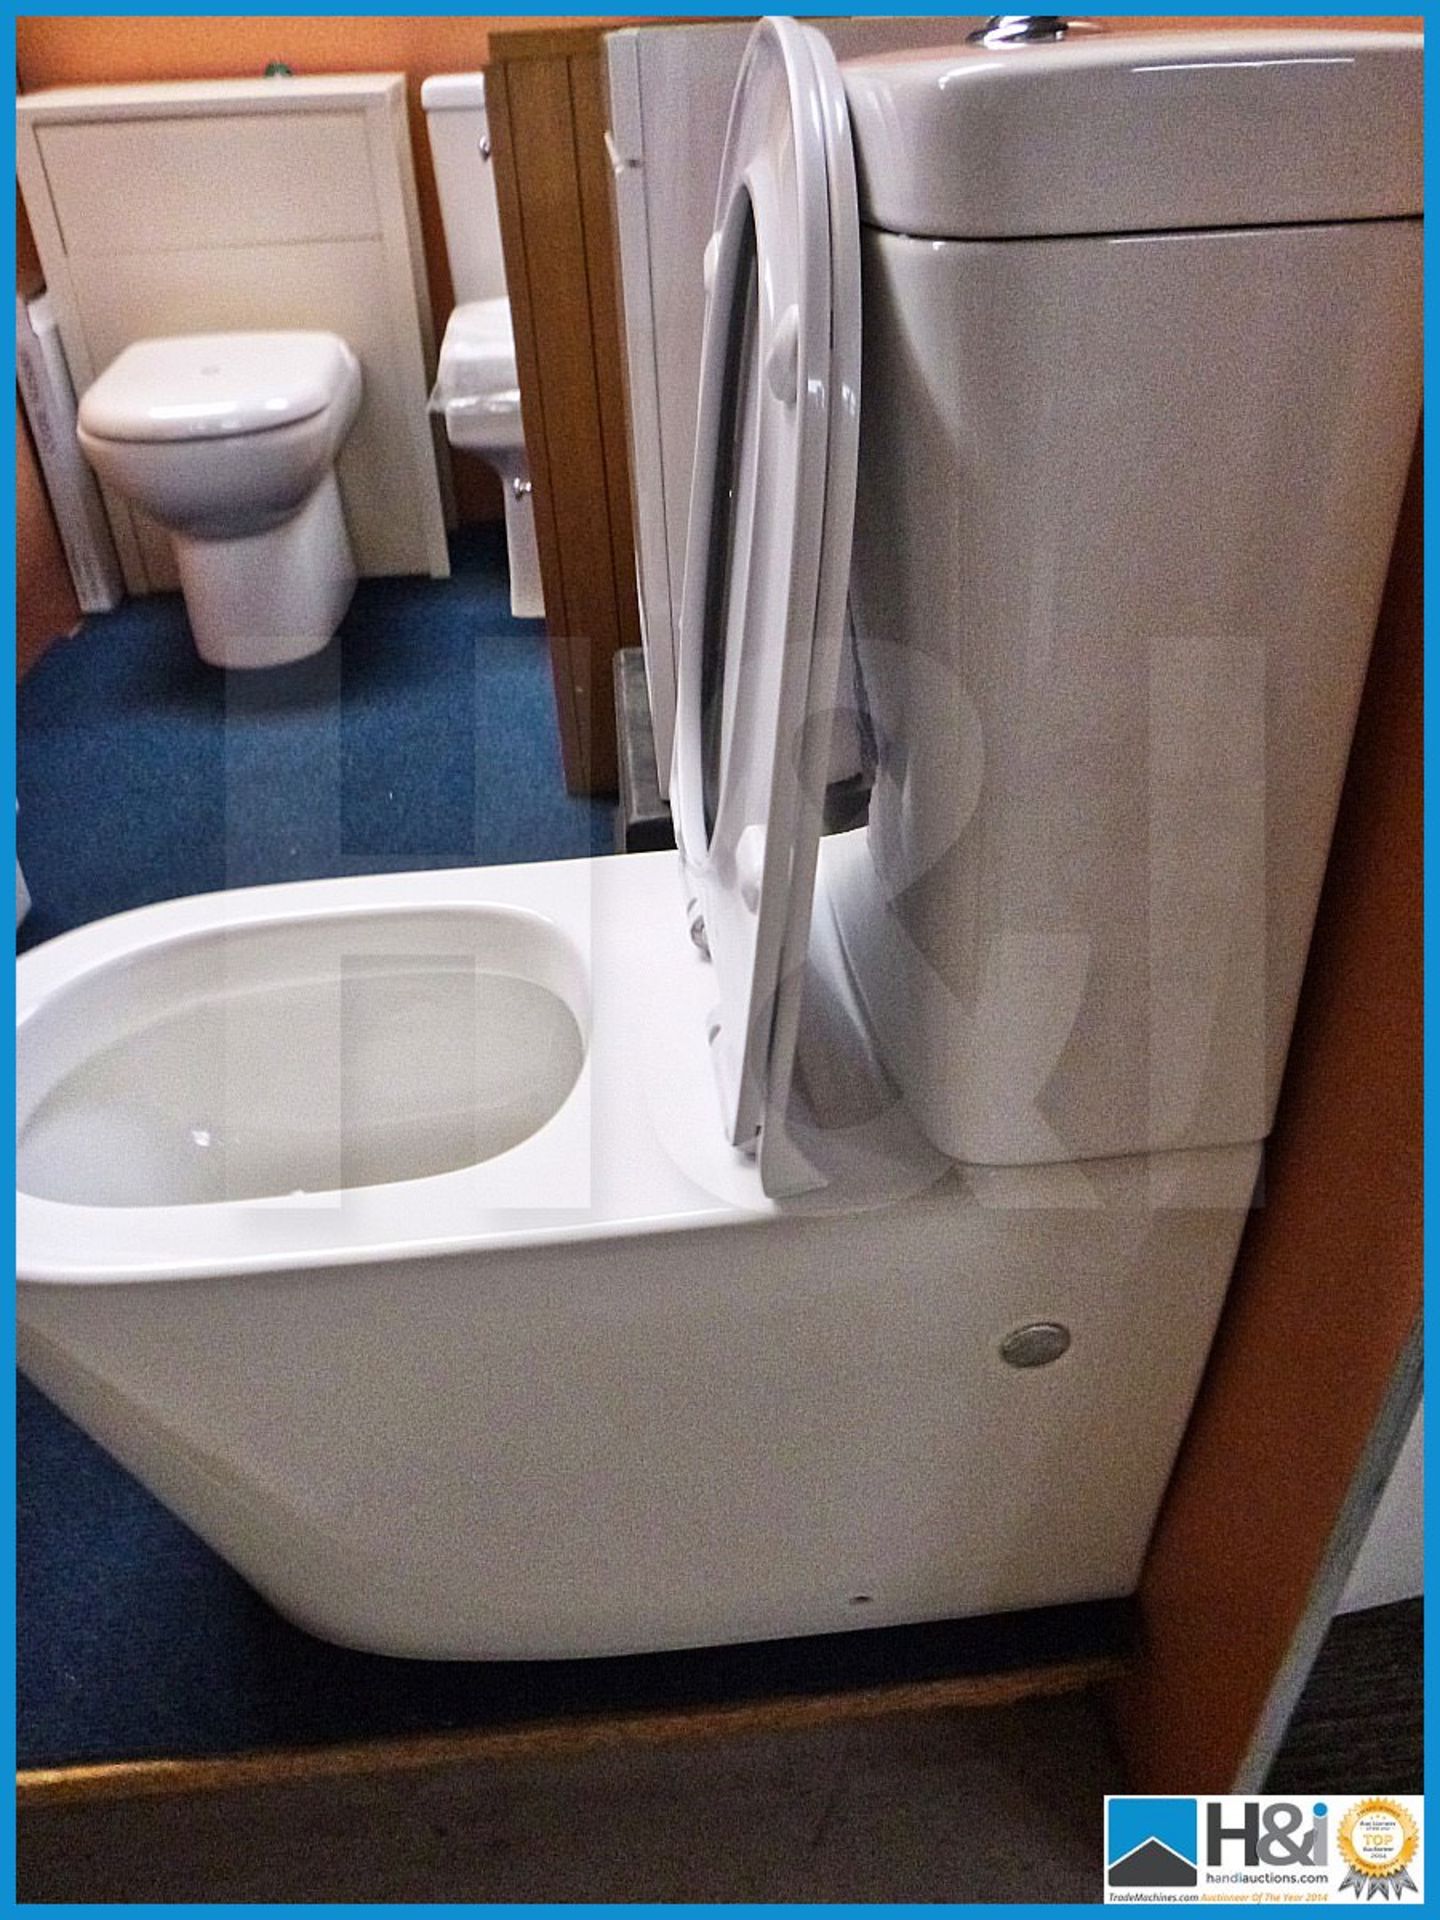 Luxury K 008 Full facia vitreous china close coupled toilet. Complete with clean easy soft close sea - Image 5 of 5